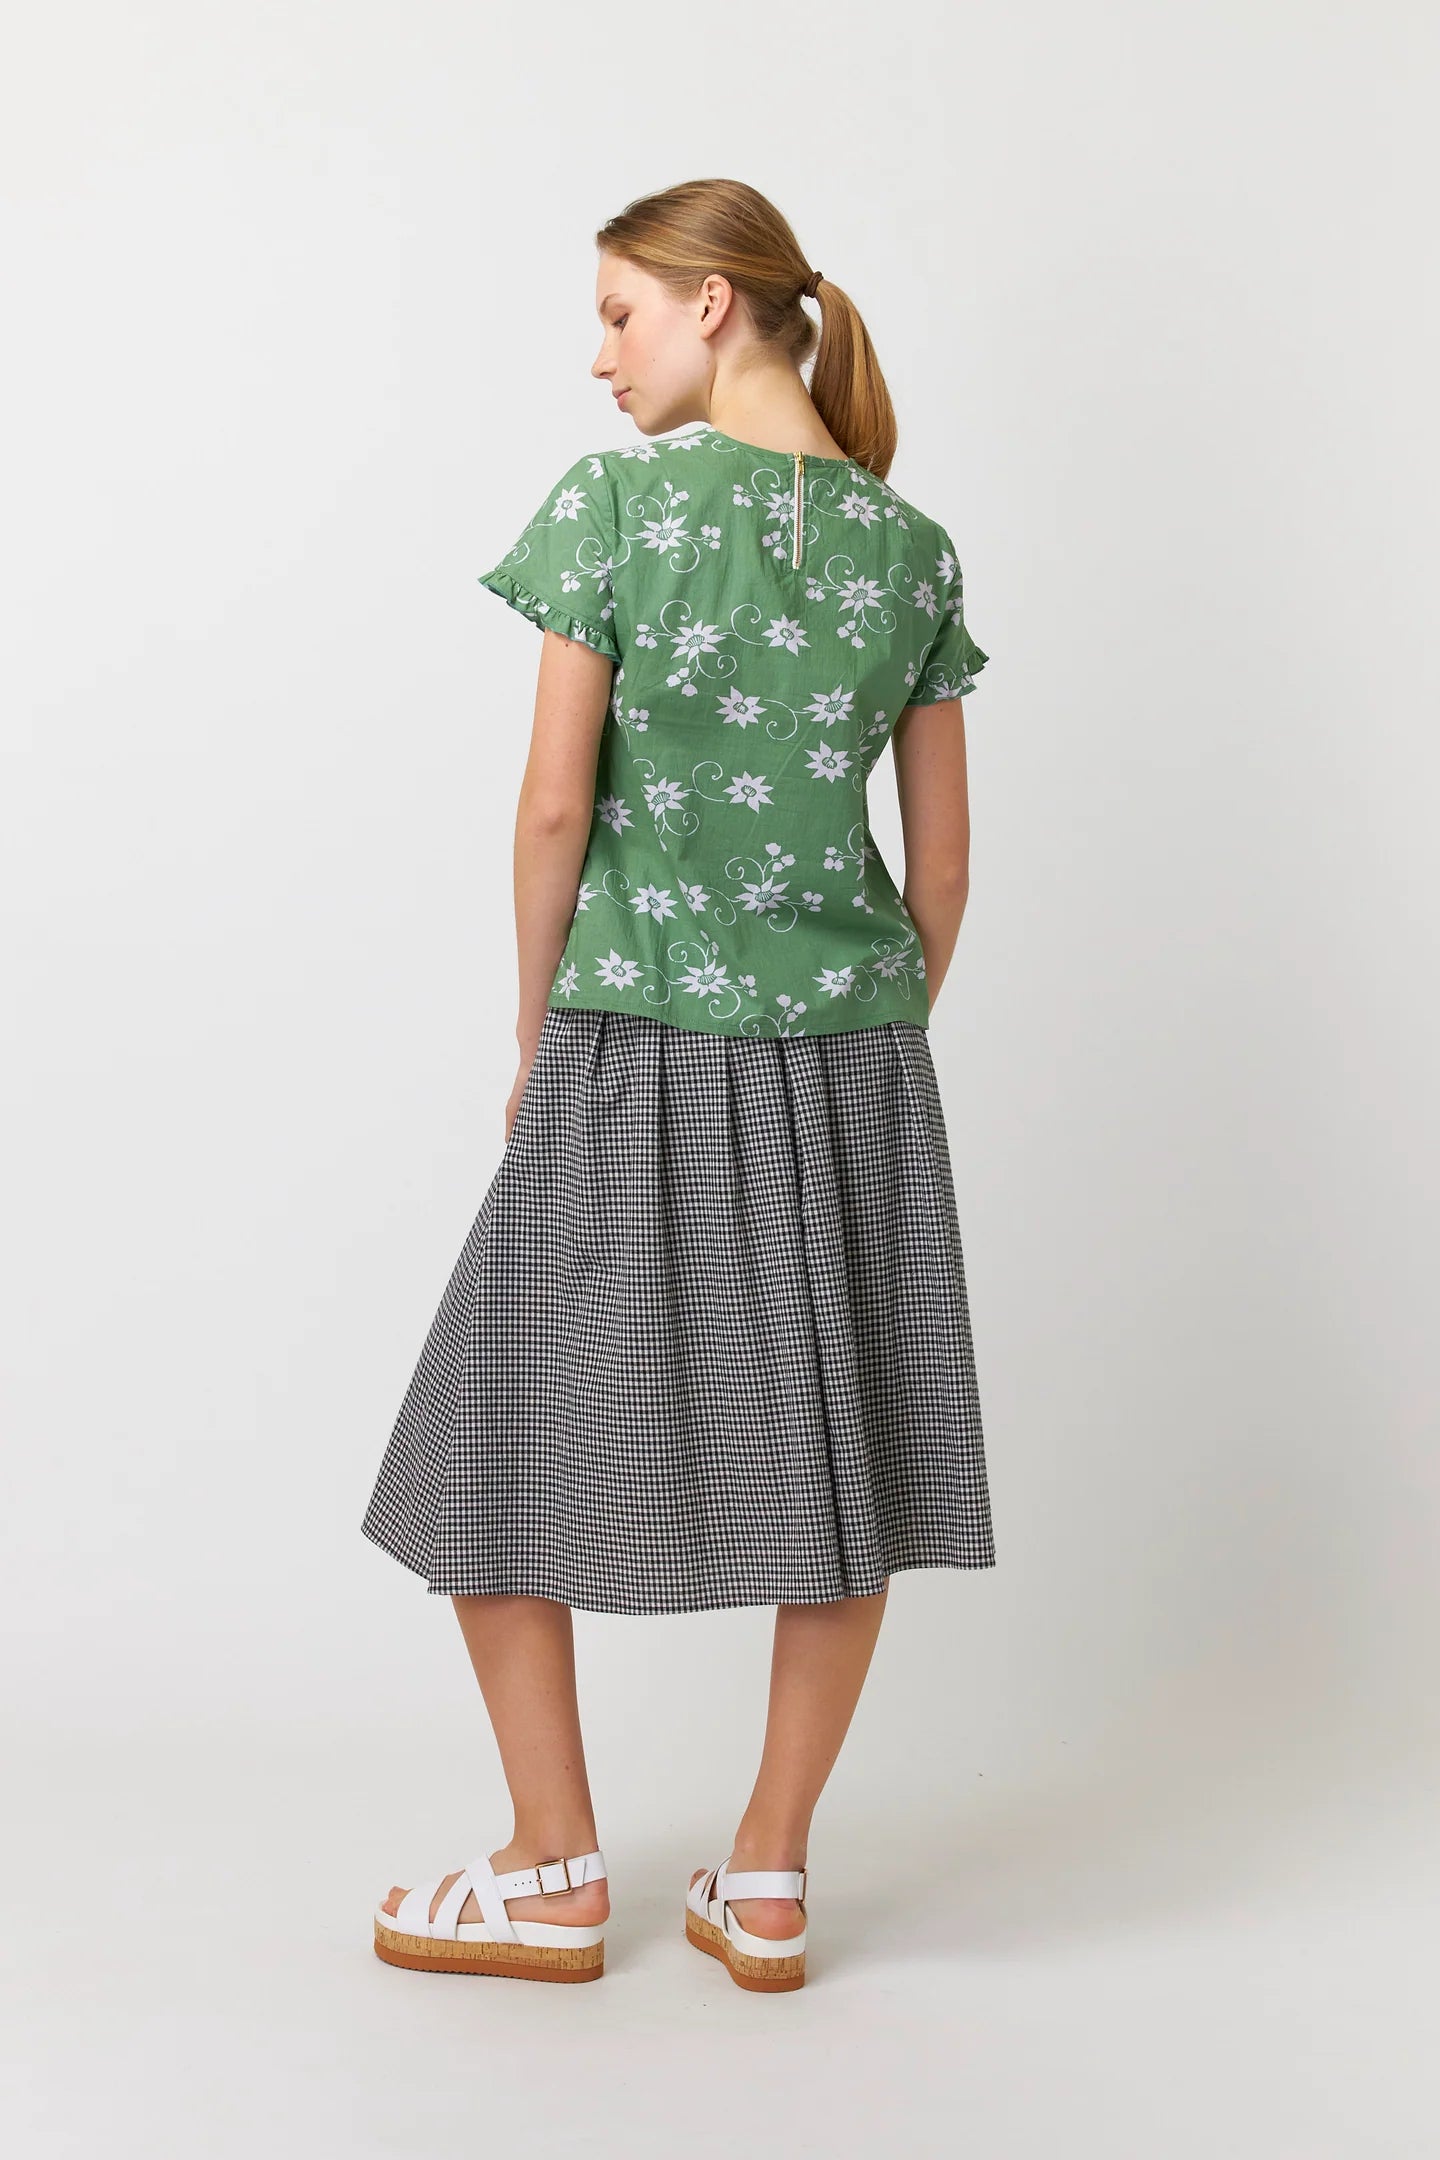 SYLVESTER Water Lily Top - SALE